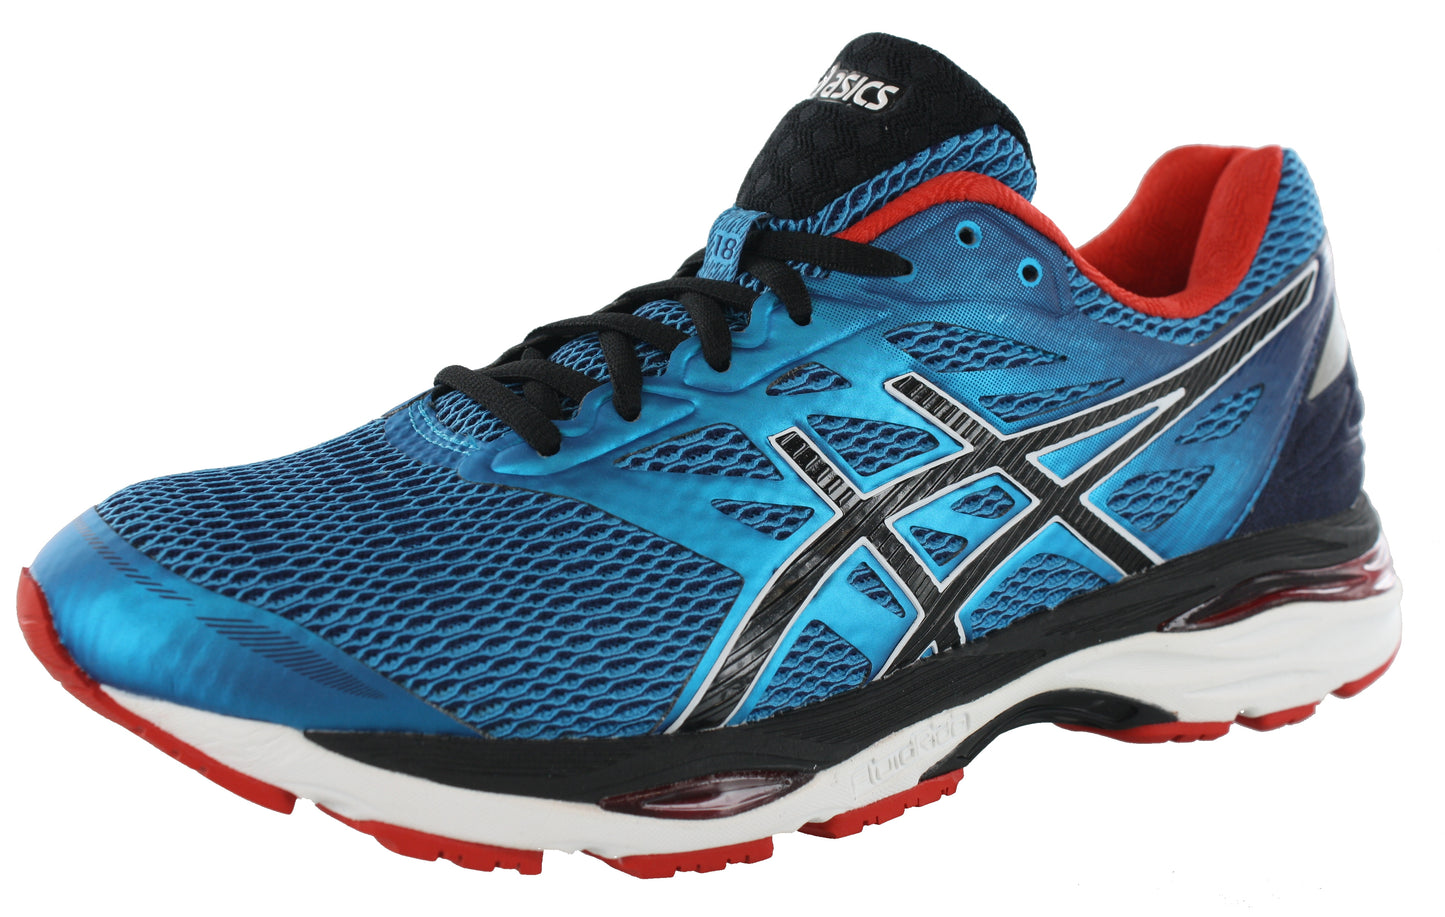 Lateral of Imperial blue with black, white, and vermillion red accents ASICS Men Walking Trail Cushioned Running Shoes Cumulus 18